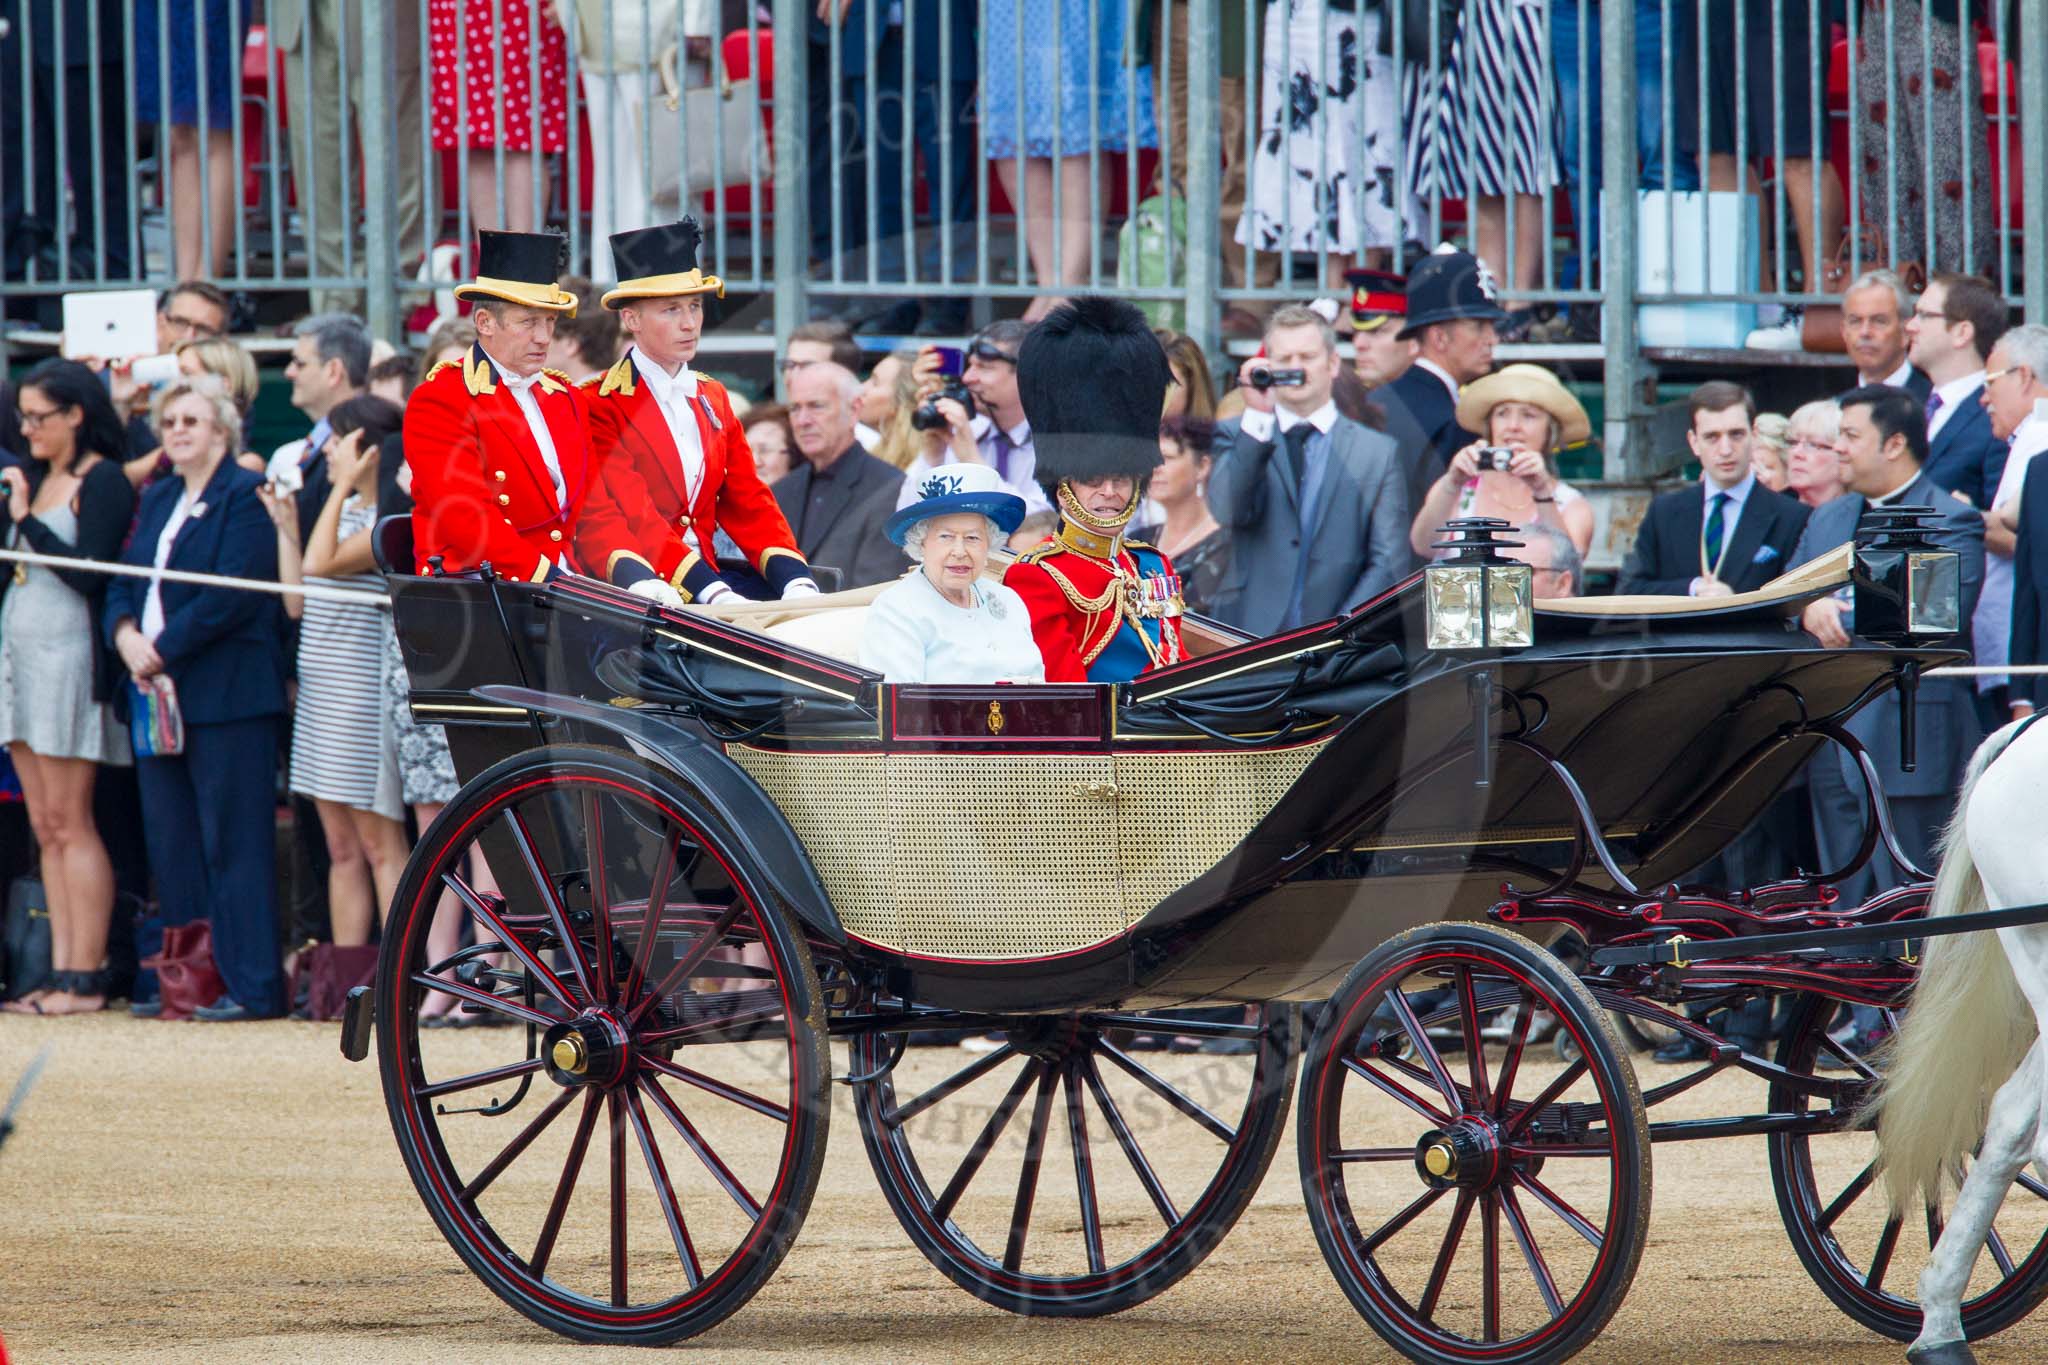 Trooping the Colour 2014.
Horse Guards Parade, Westminster,
London SW1A,

United Kingdom,
on 14 June 2014 at 10:58, image #342